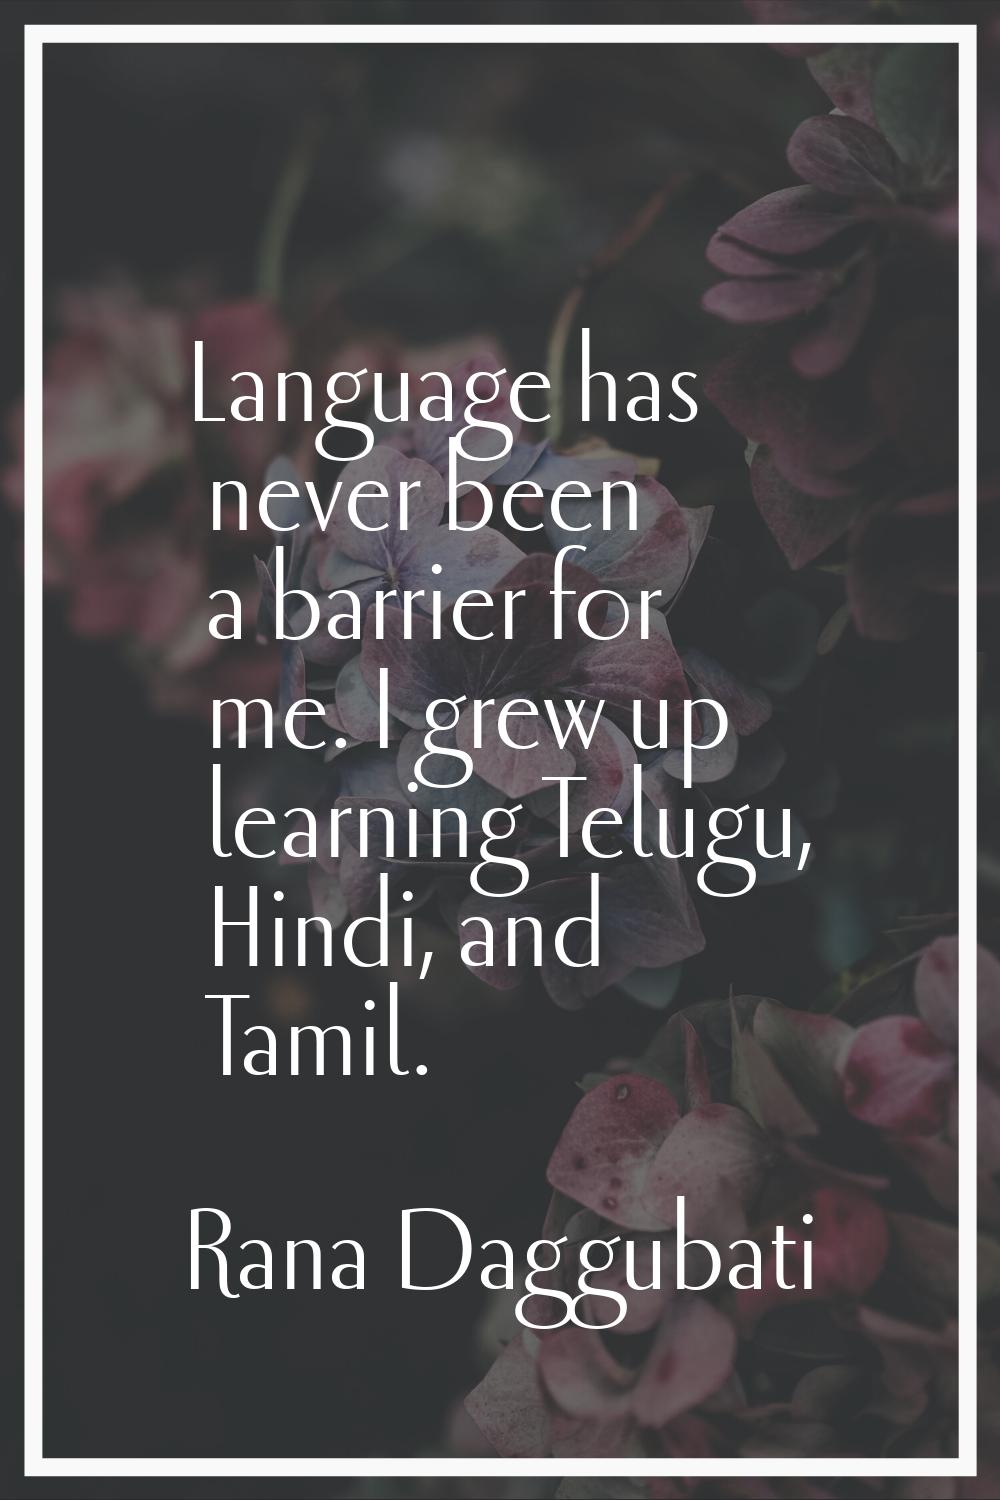 Language has never been a barrier for me. I grew up learning Telugu, Hindi, and Tamil.